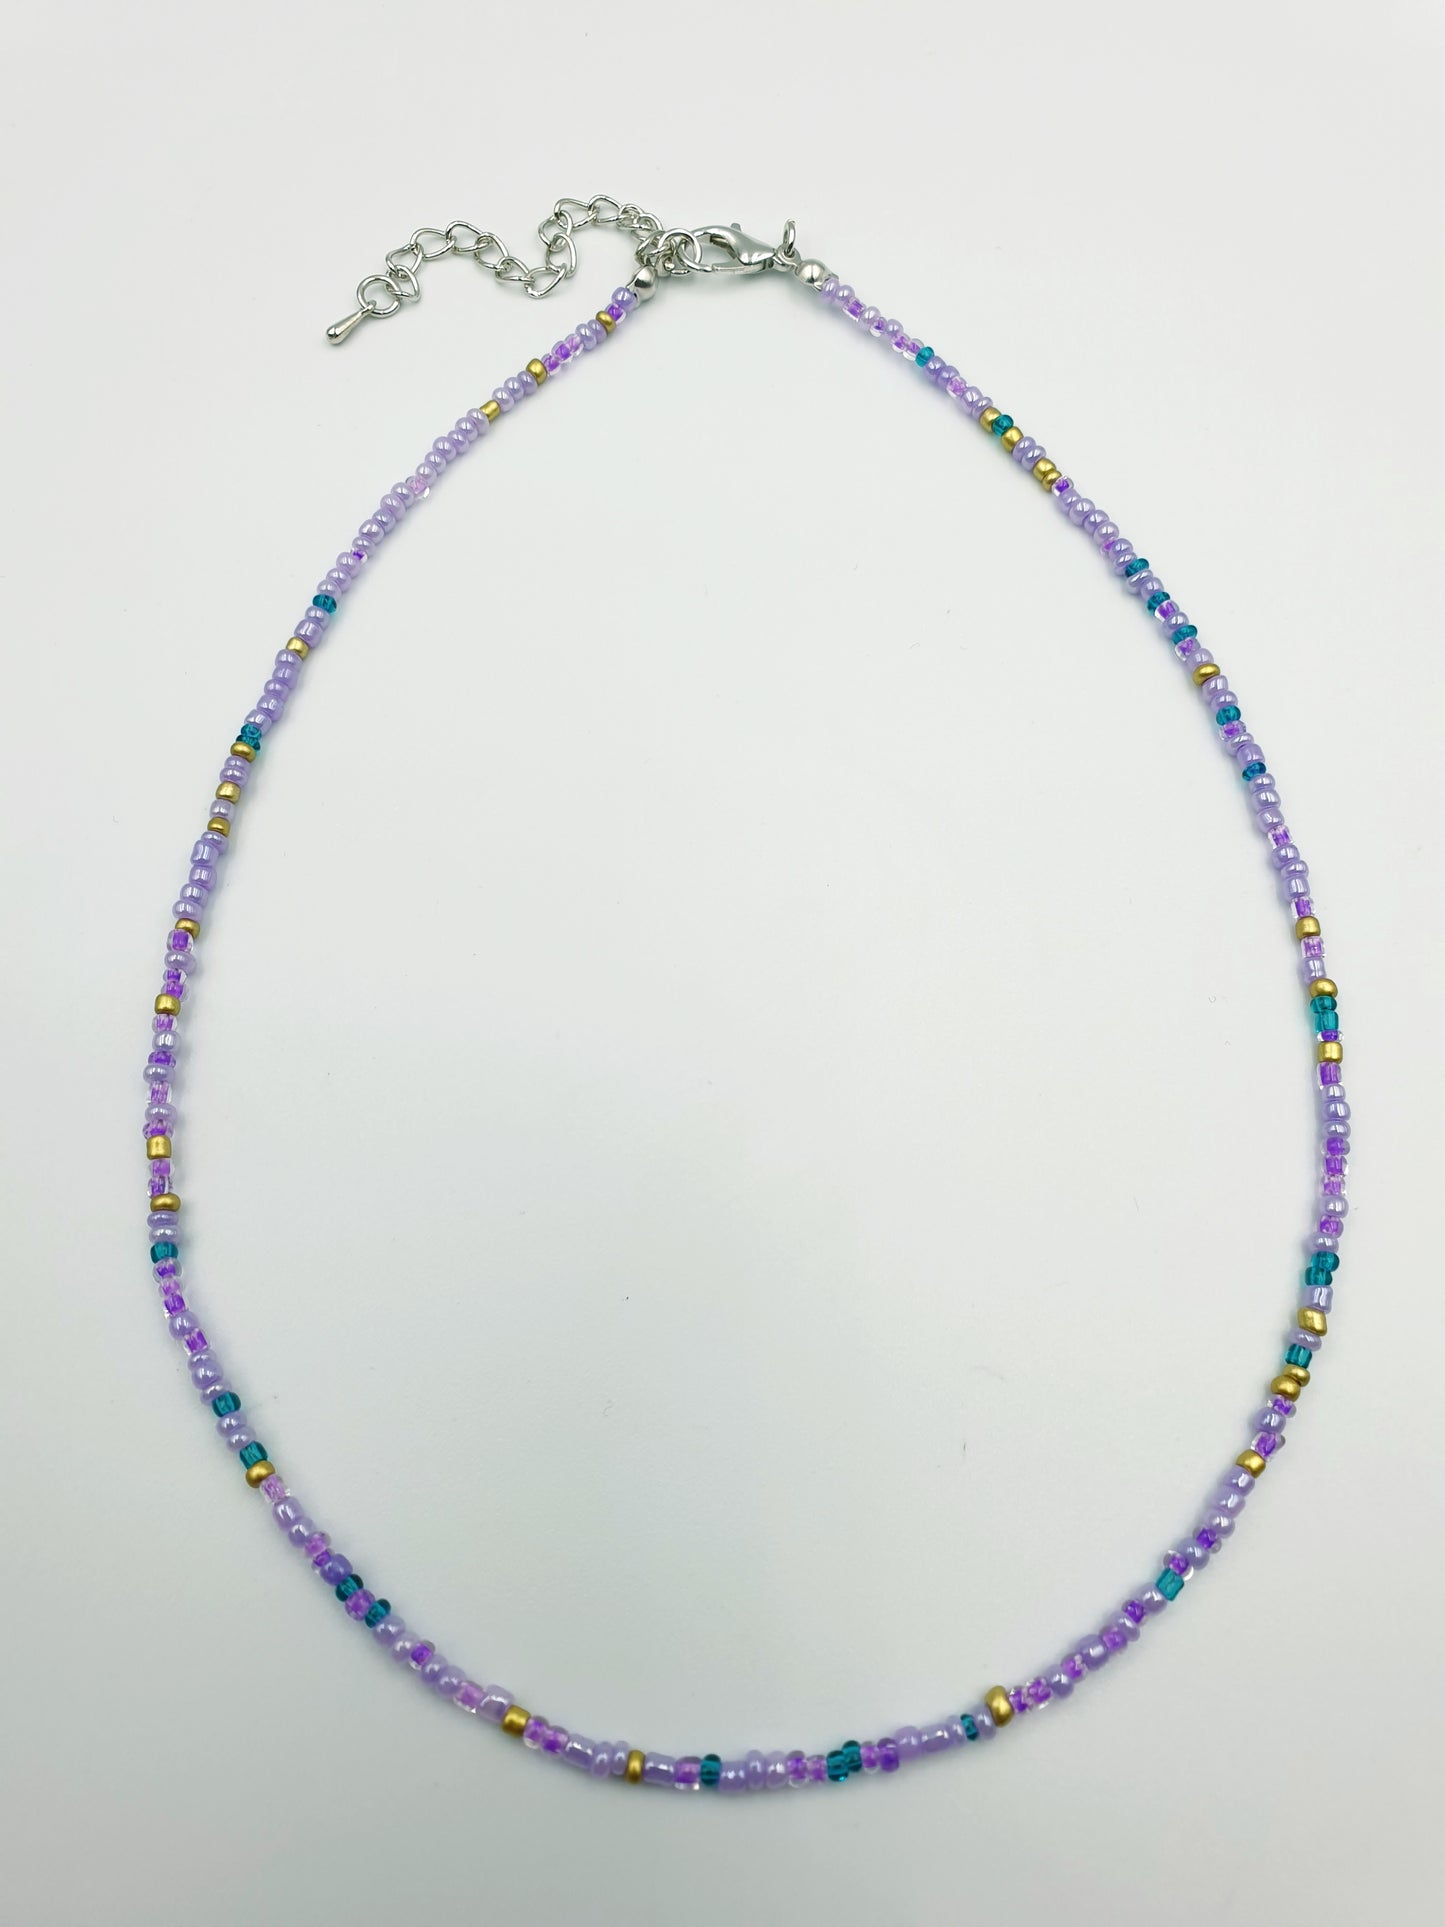 Beaded necklace, beads, beaded necklace, girls jewelery, ladies necklace, choker necklace, unique gifts, popular, 90s vibes, boho, bohemian jewelery, funky jewellery, summer vibes, Rainbow